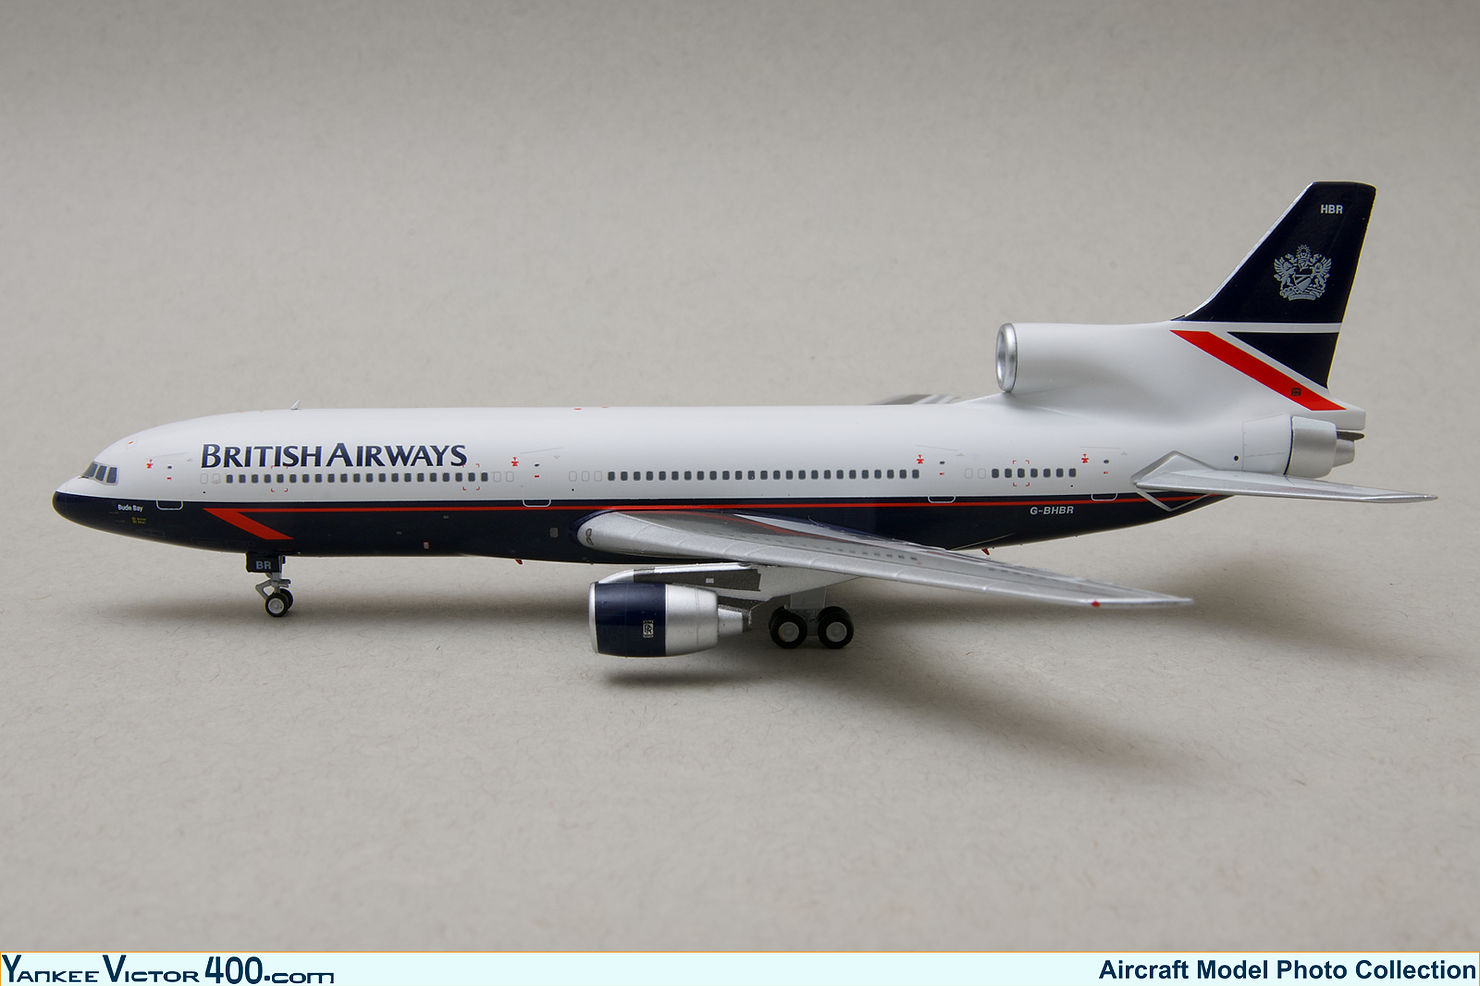 Scale aircraft model of a British Airways Lockheed L1011-200 TriStar registered as G-BHBR made by NG Models in 1:400 scale